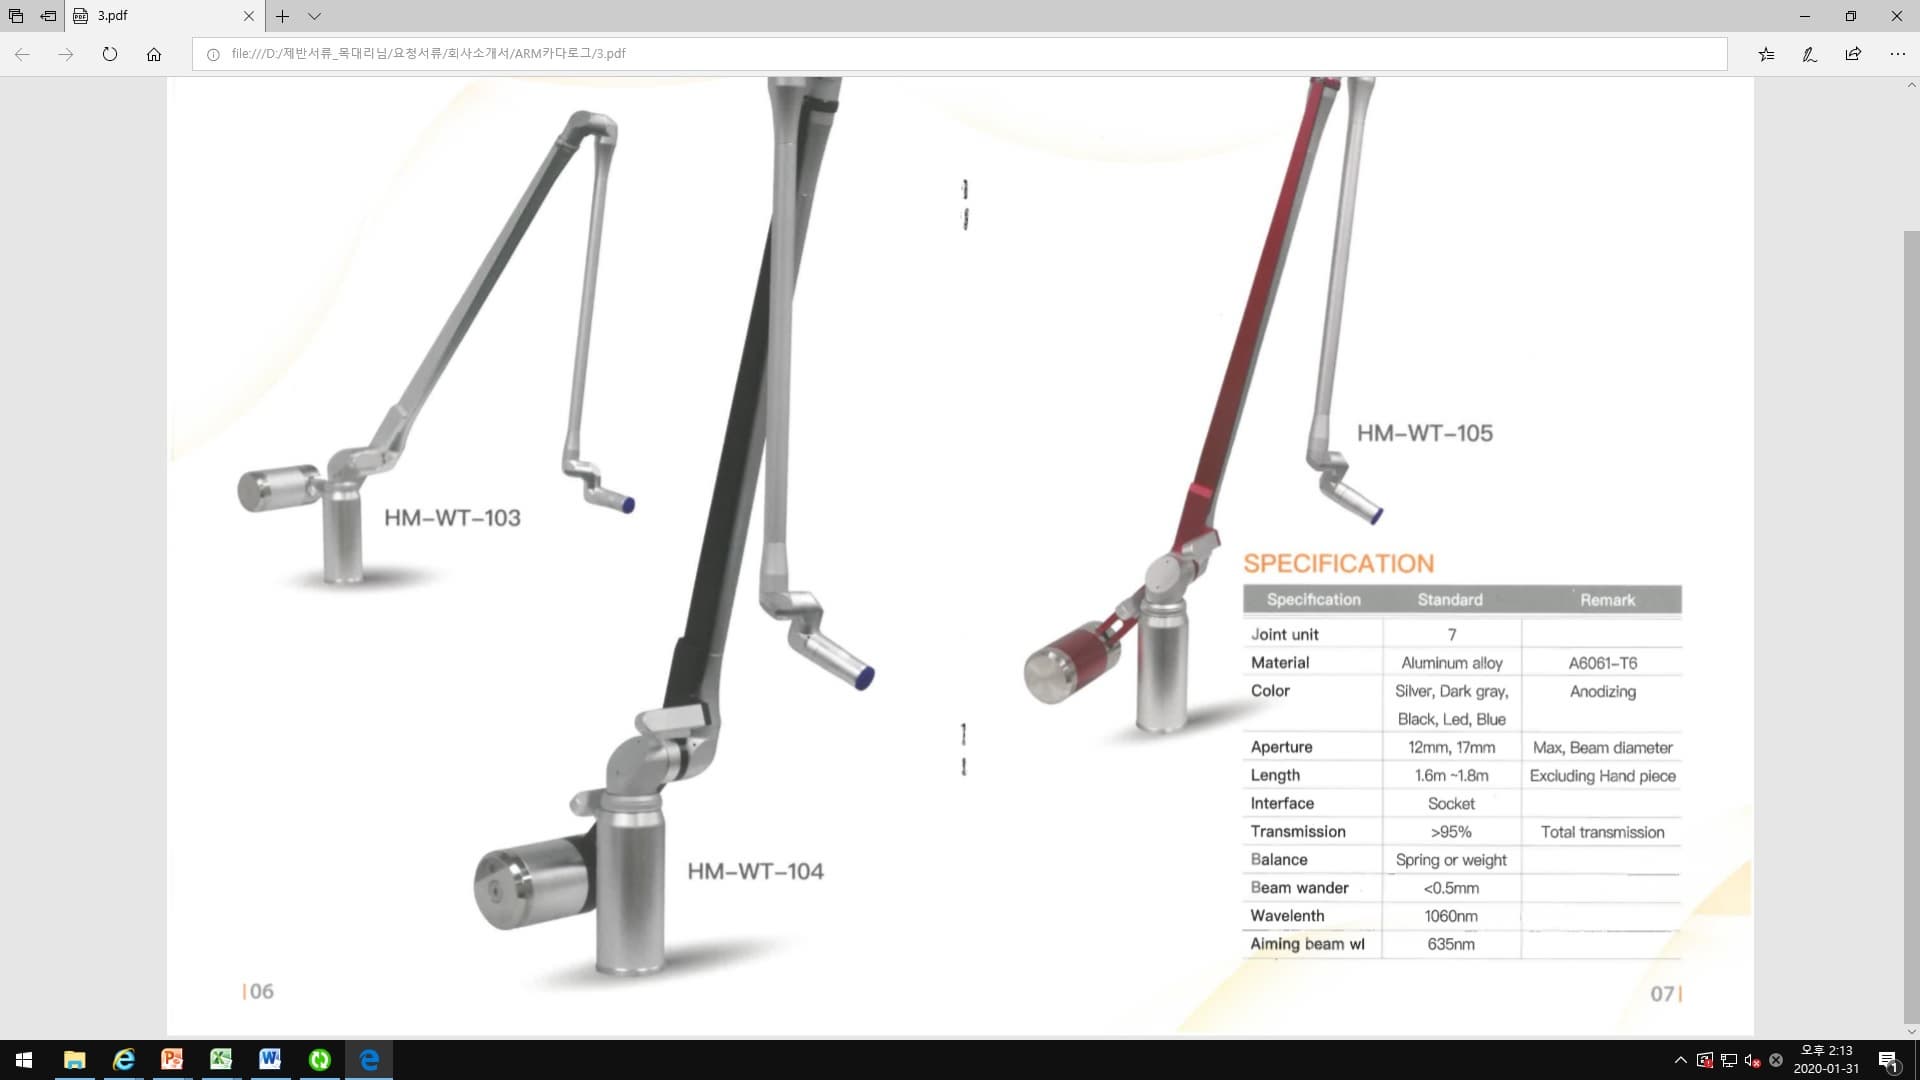 Medical Device _ 7 JOINT ARTICULATED LASER ARM